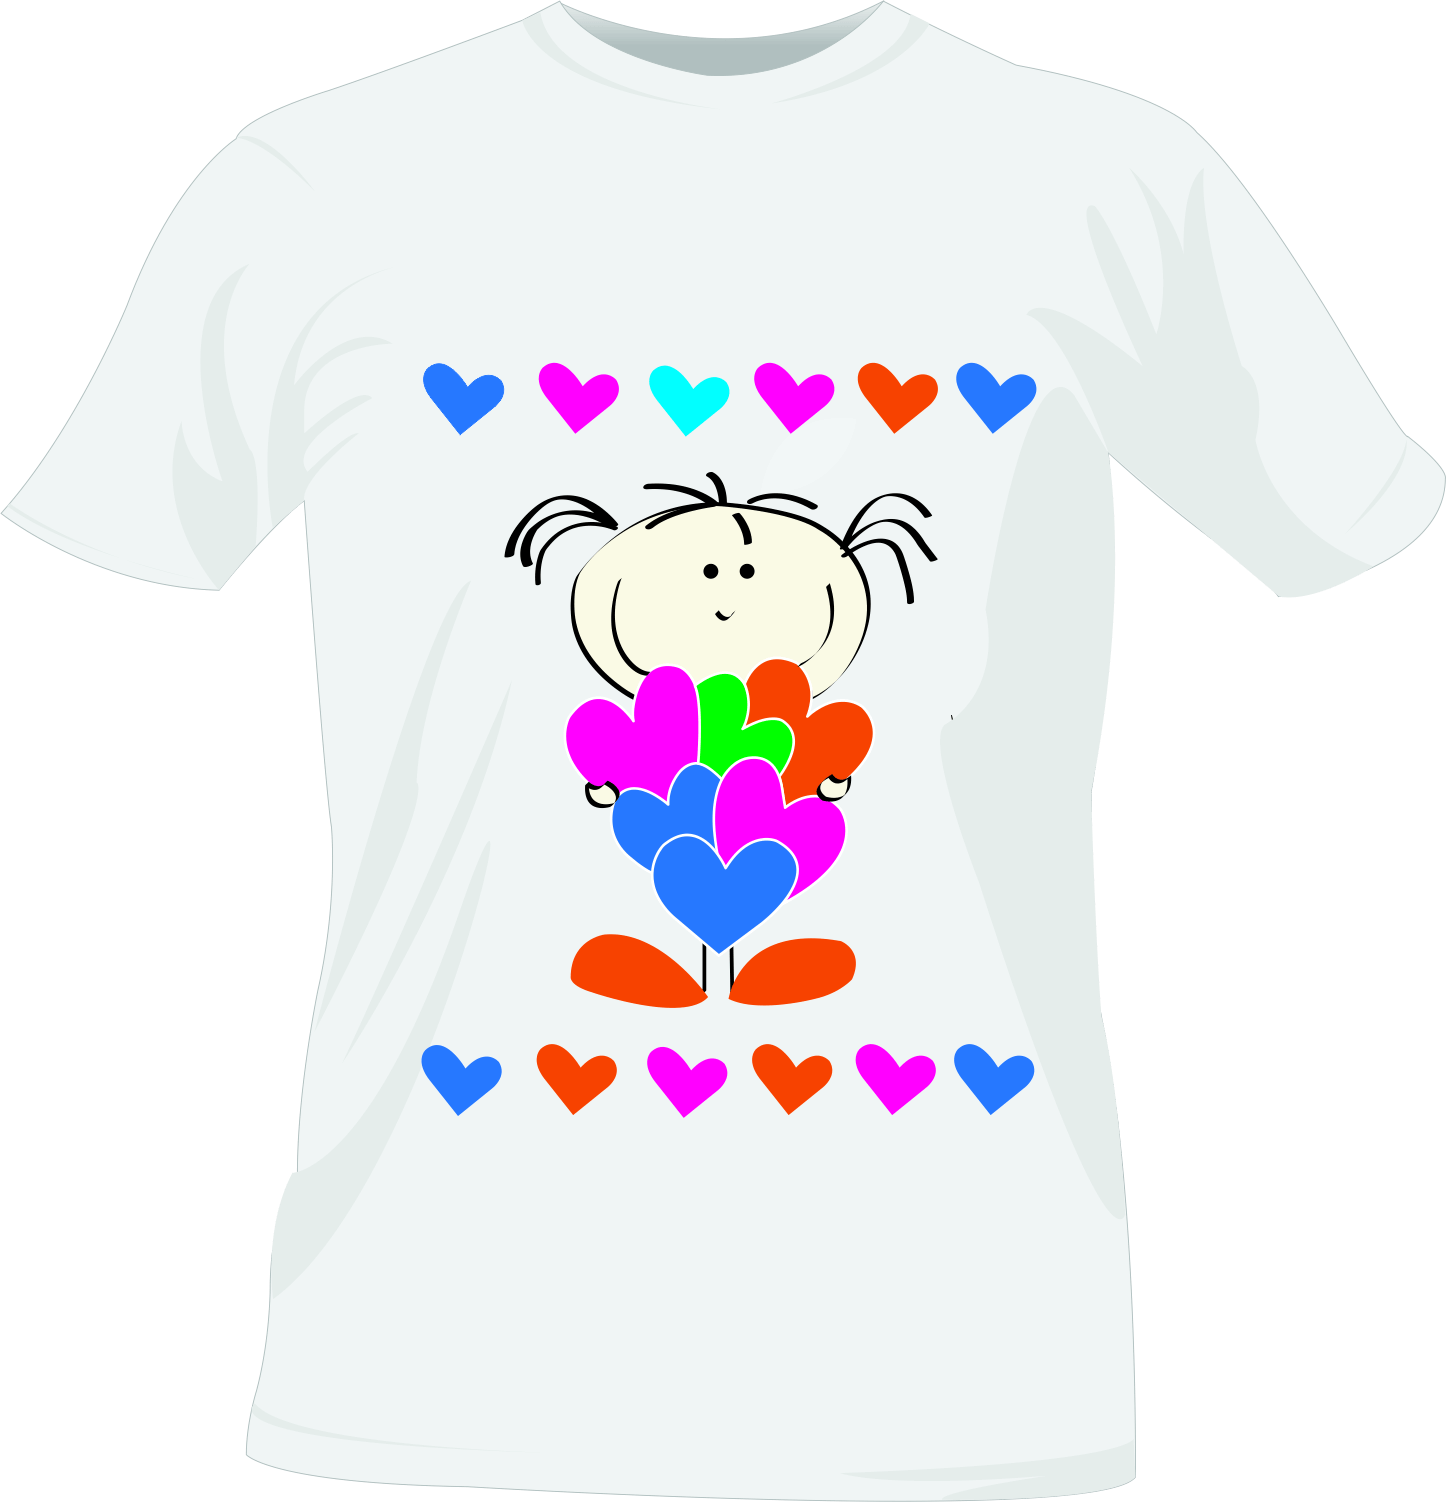 Colorful Hearts T Shirt Design